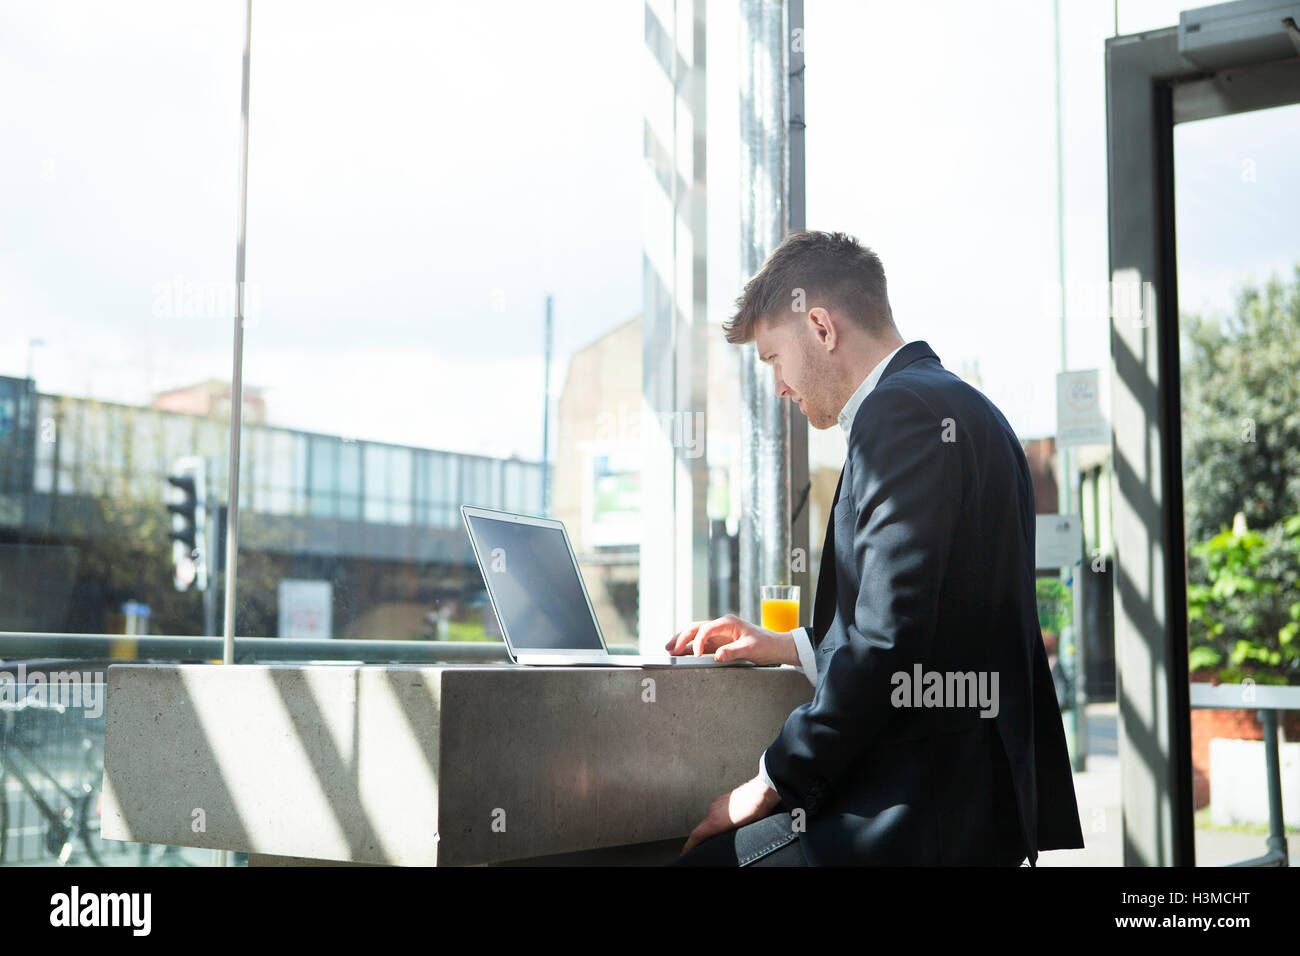 Businessman working with laptop in cafe Banque D'Images